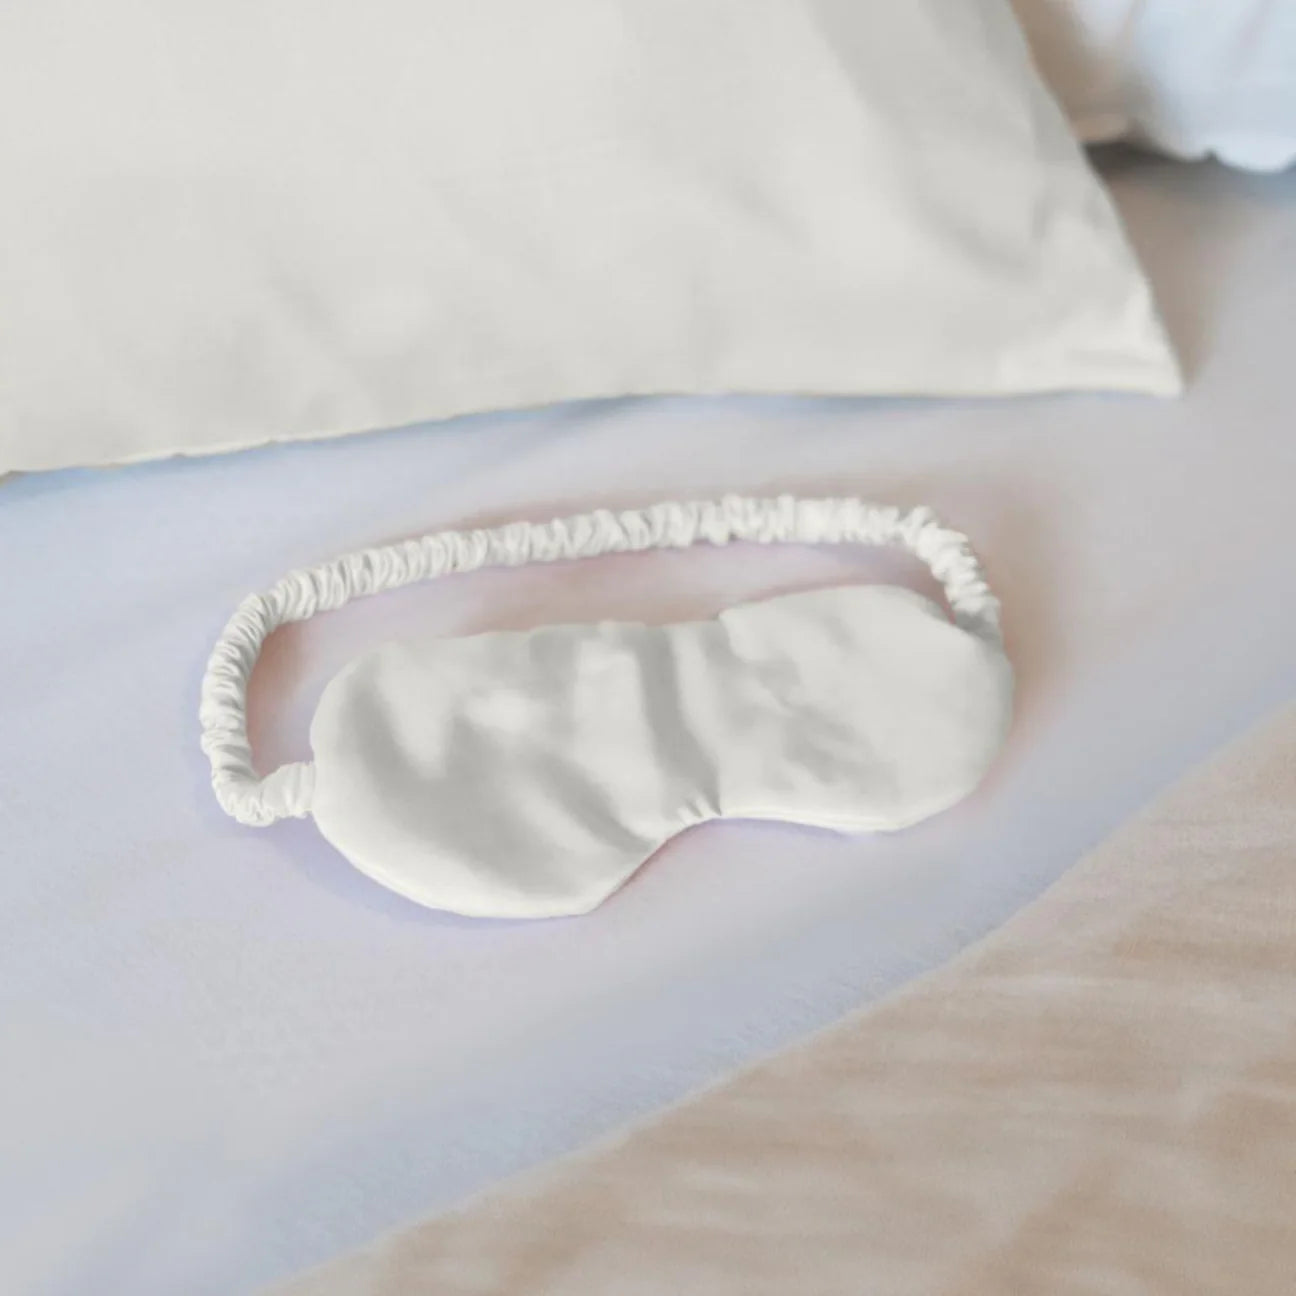 Personalised Embroidered White Silky Satin Pillowcase and Eye mask Gift Set